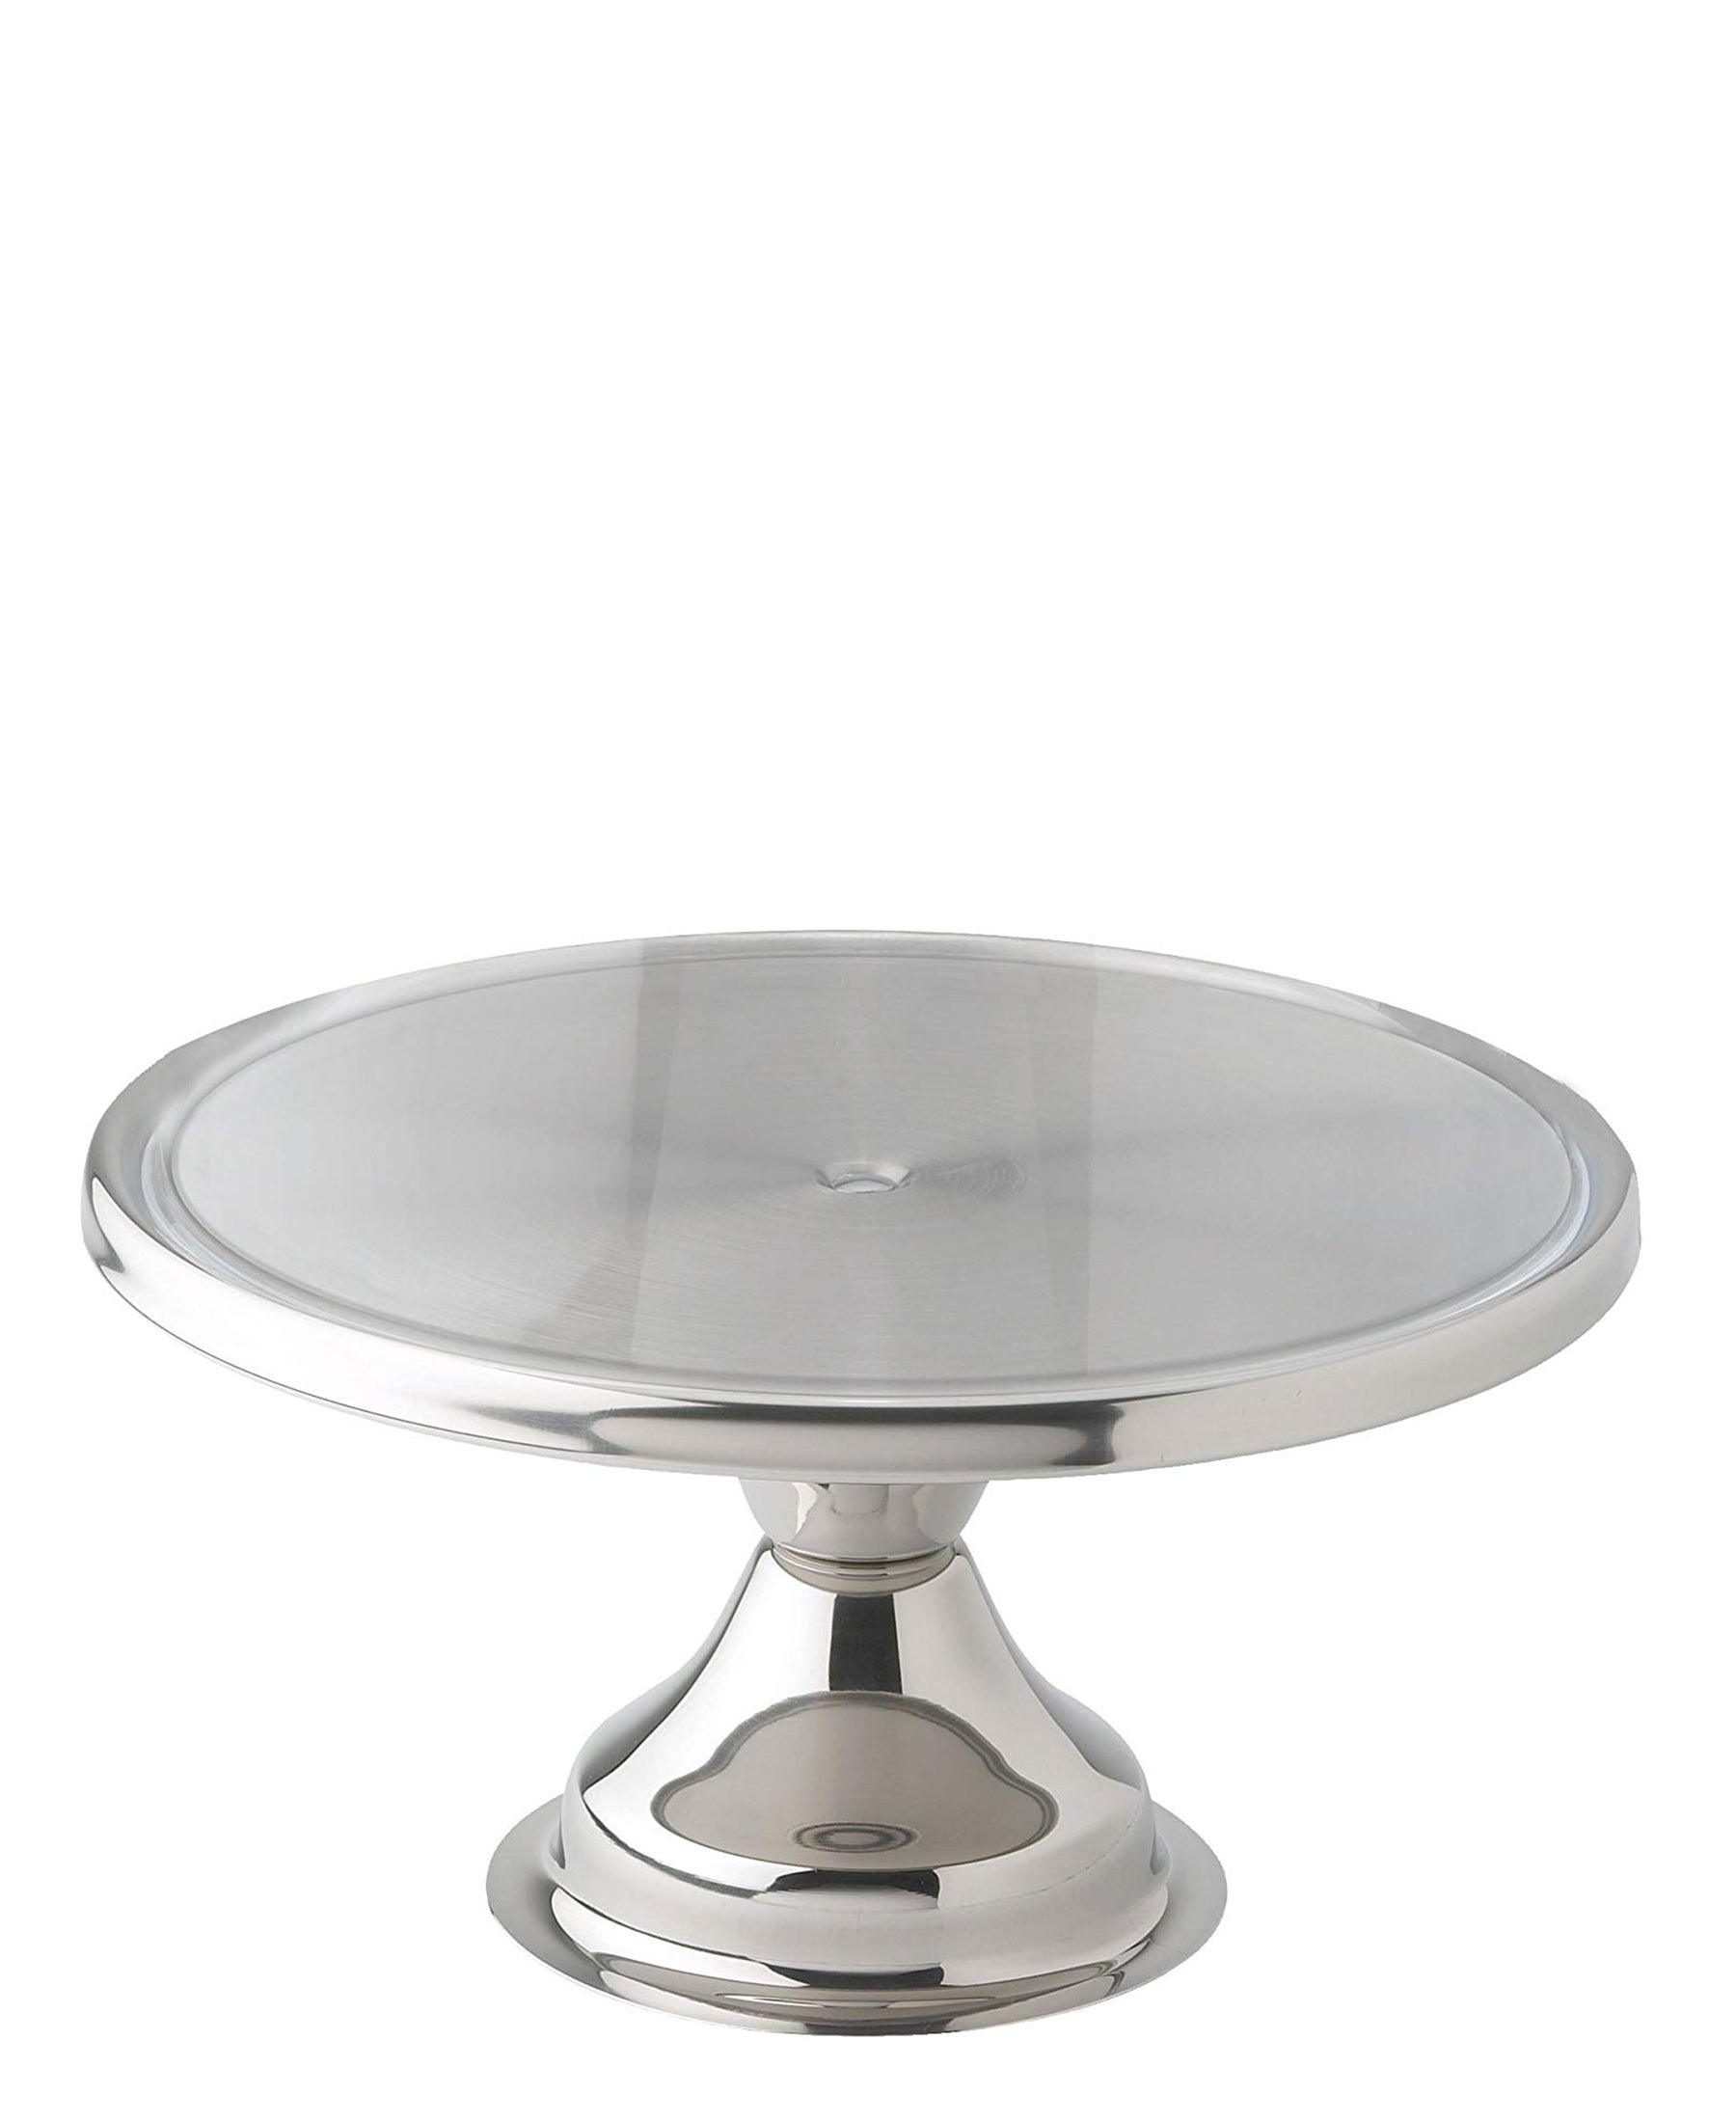 Table Pride Round Cake Stand 33cm - Silver